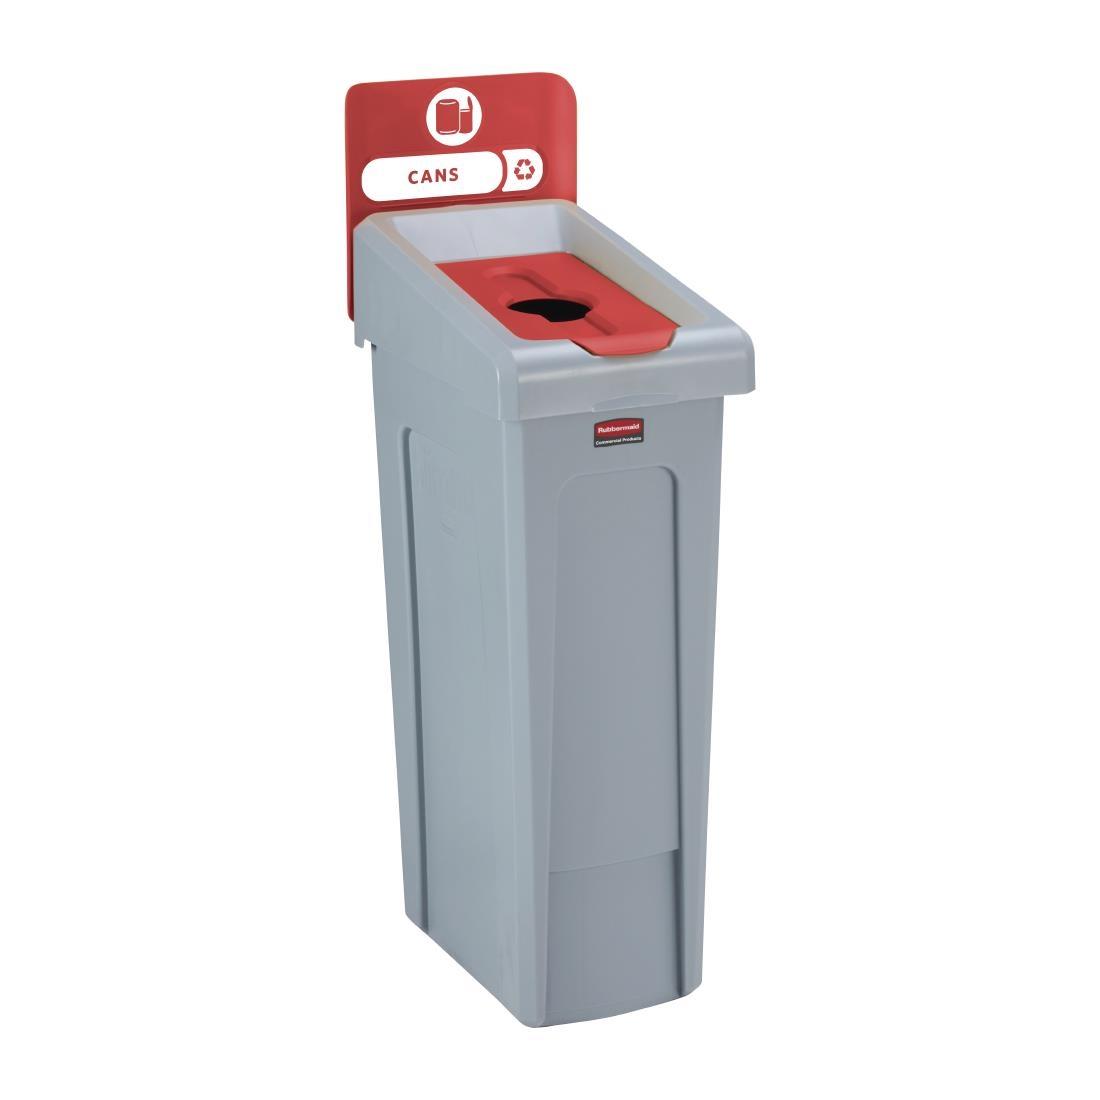 Rubbermaid Slim Jim Cans Recycling Station Red 87Ltr - DY088  - 1